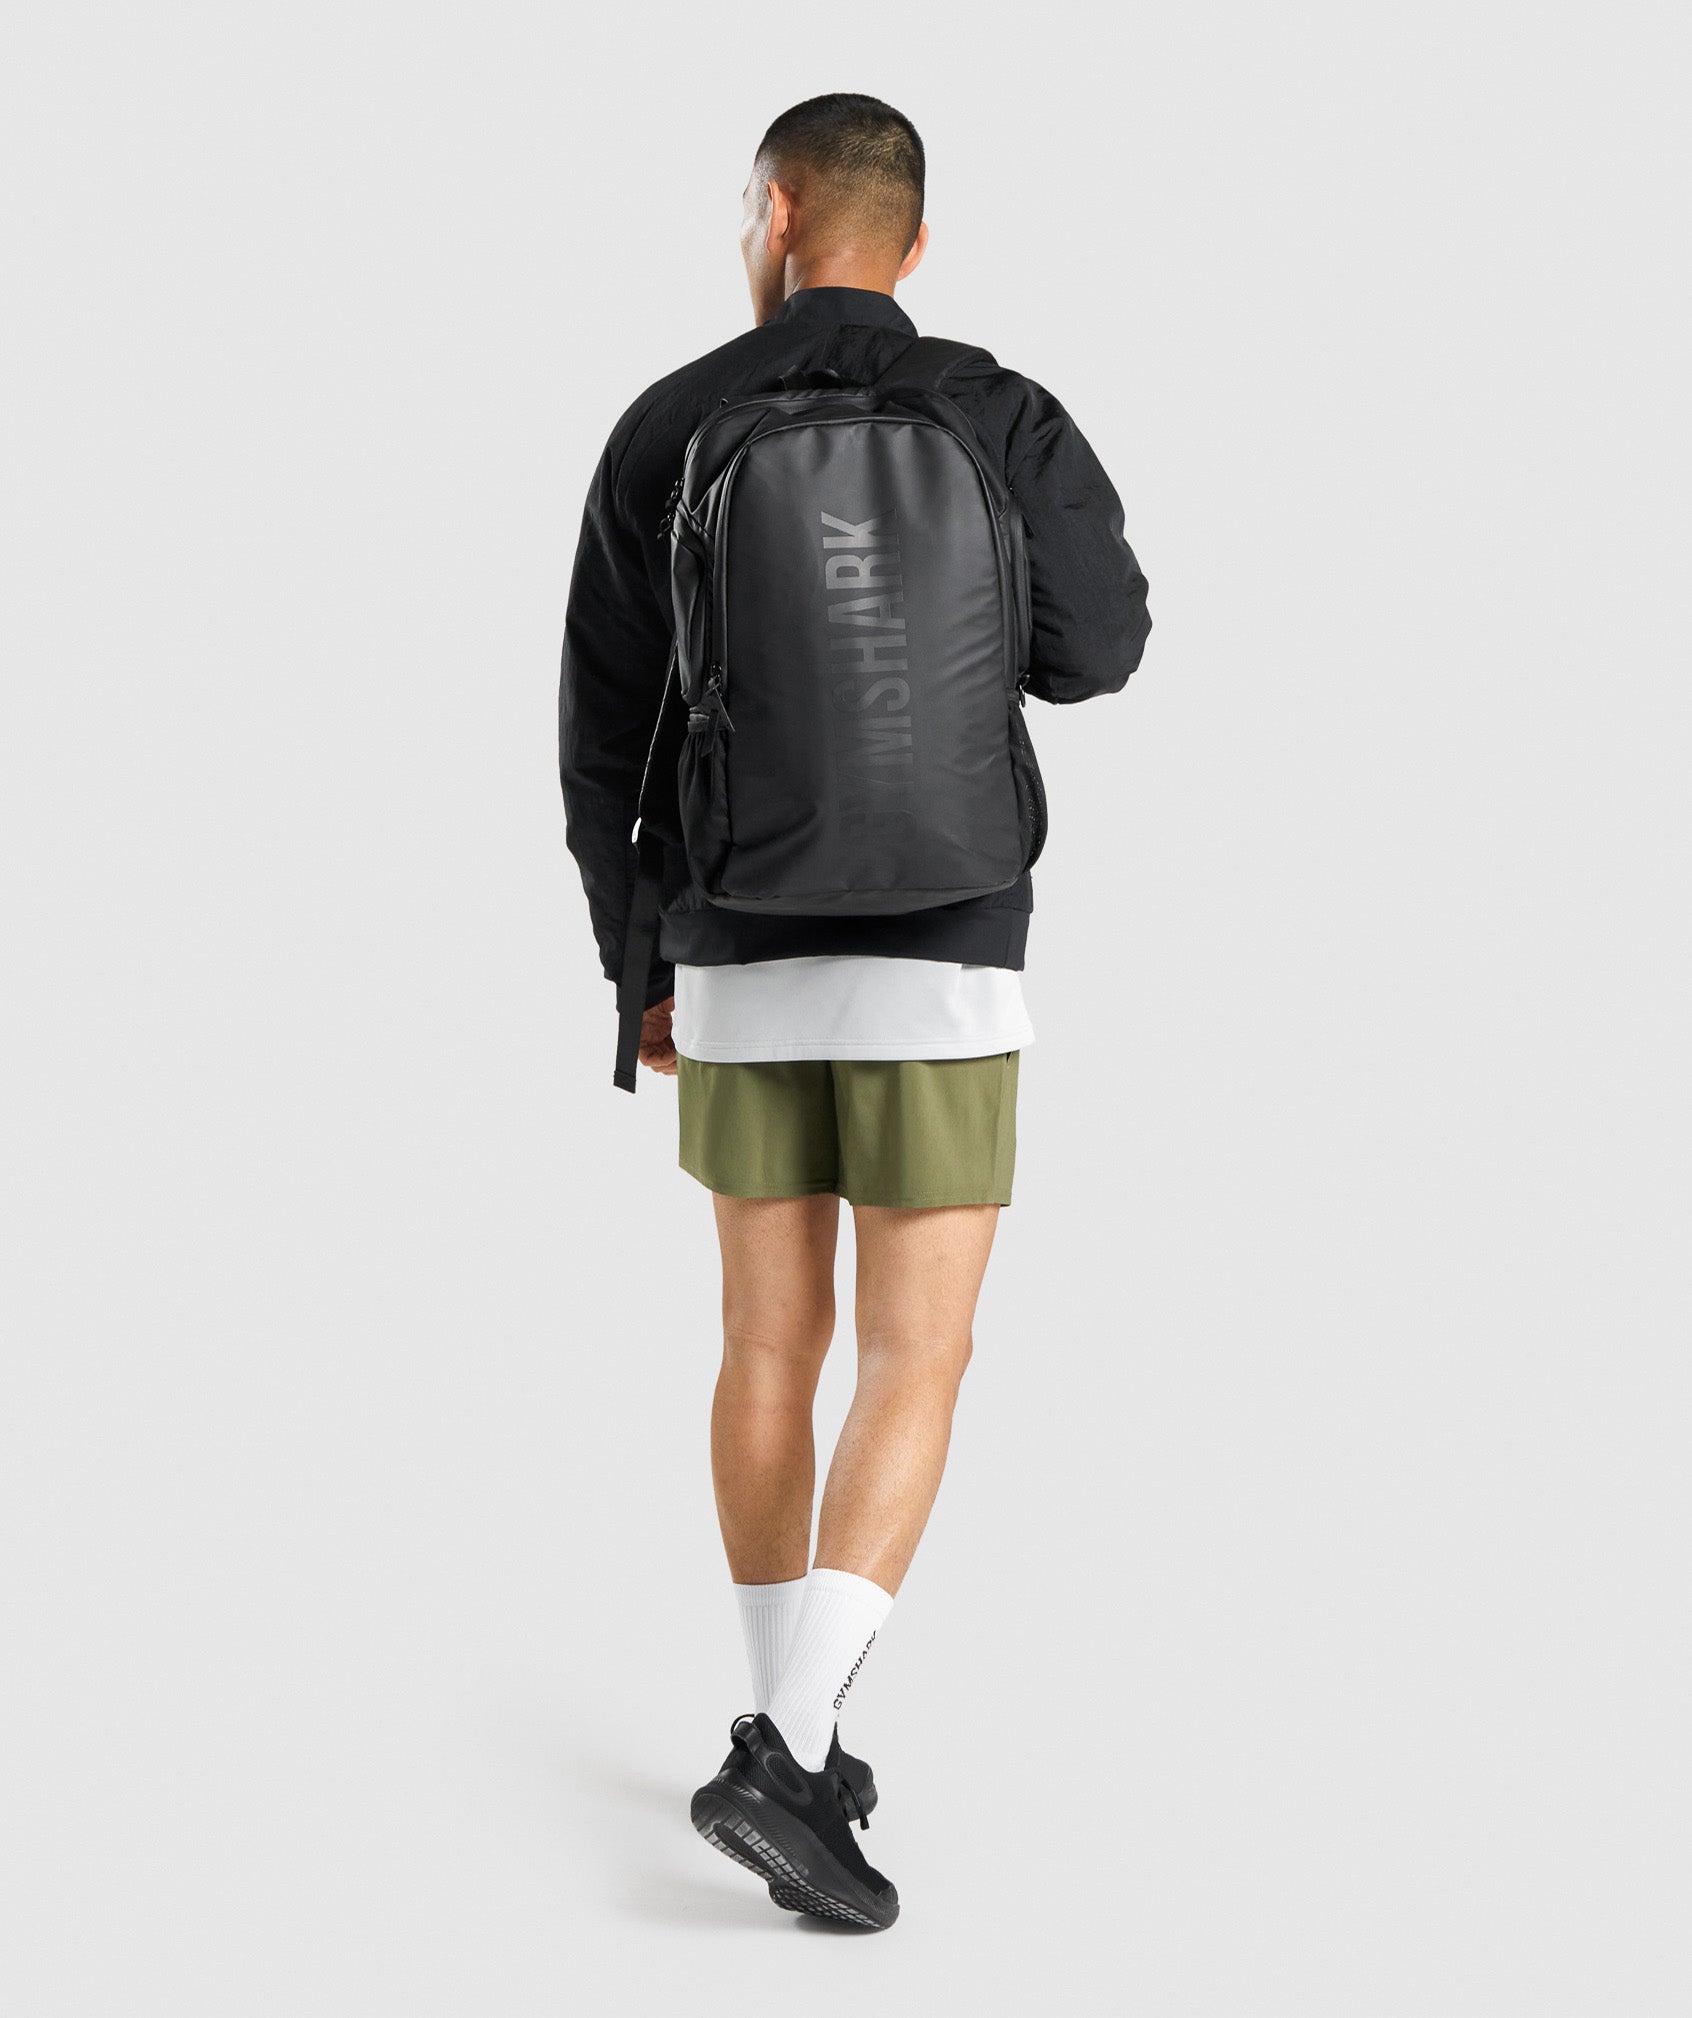 Arrival 5" Shorts in Dark Green - view 3